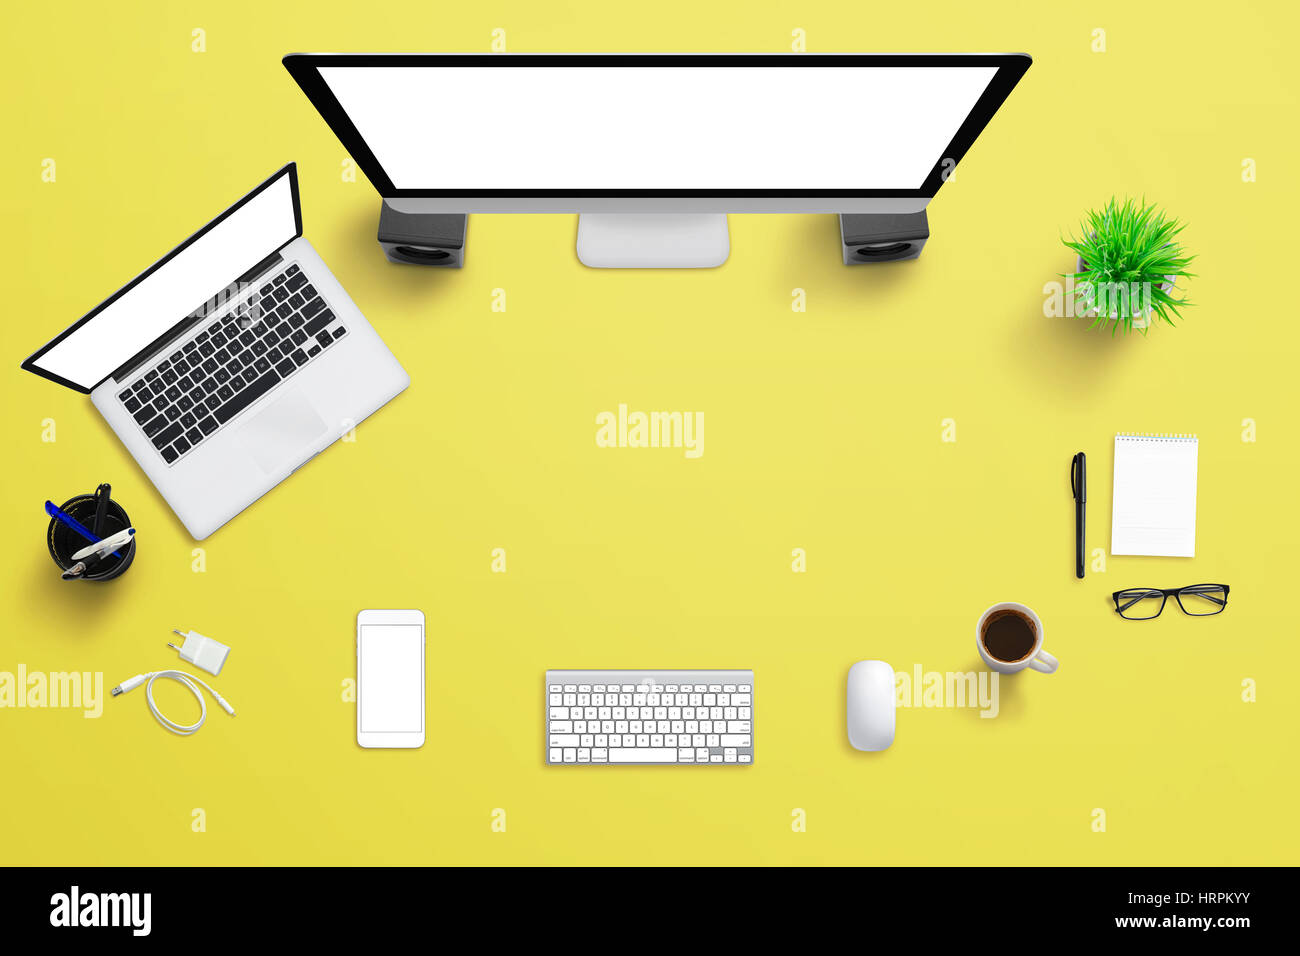 Yellow office desk with computer display, laptop, and mobile phone. Creative scene with free space for text. Stock Photo